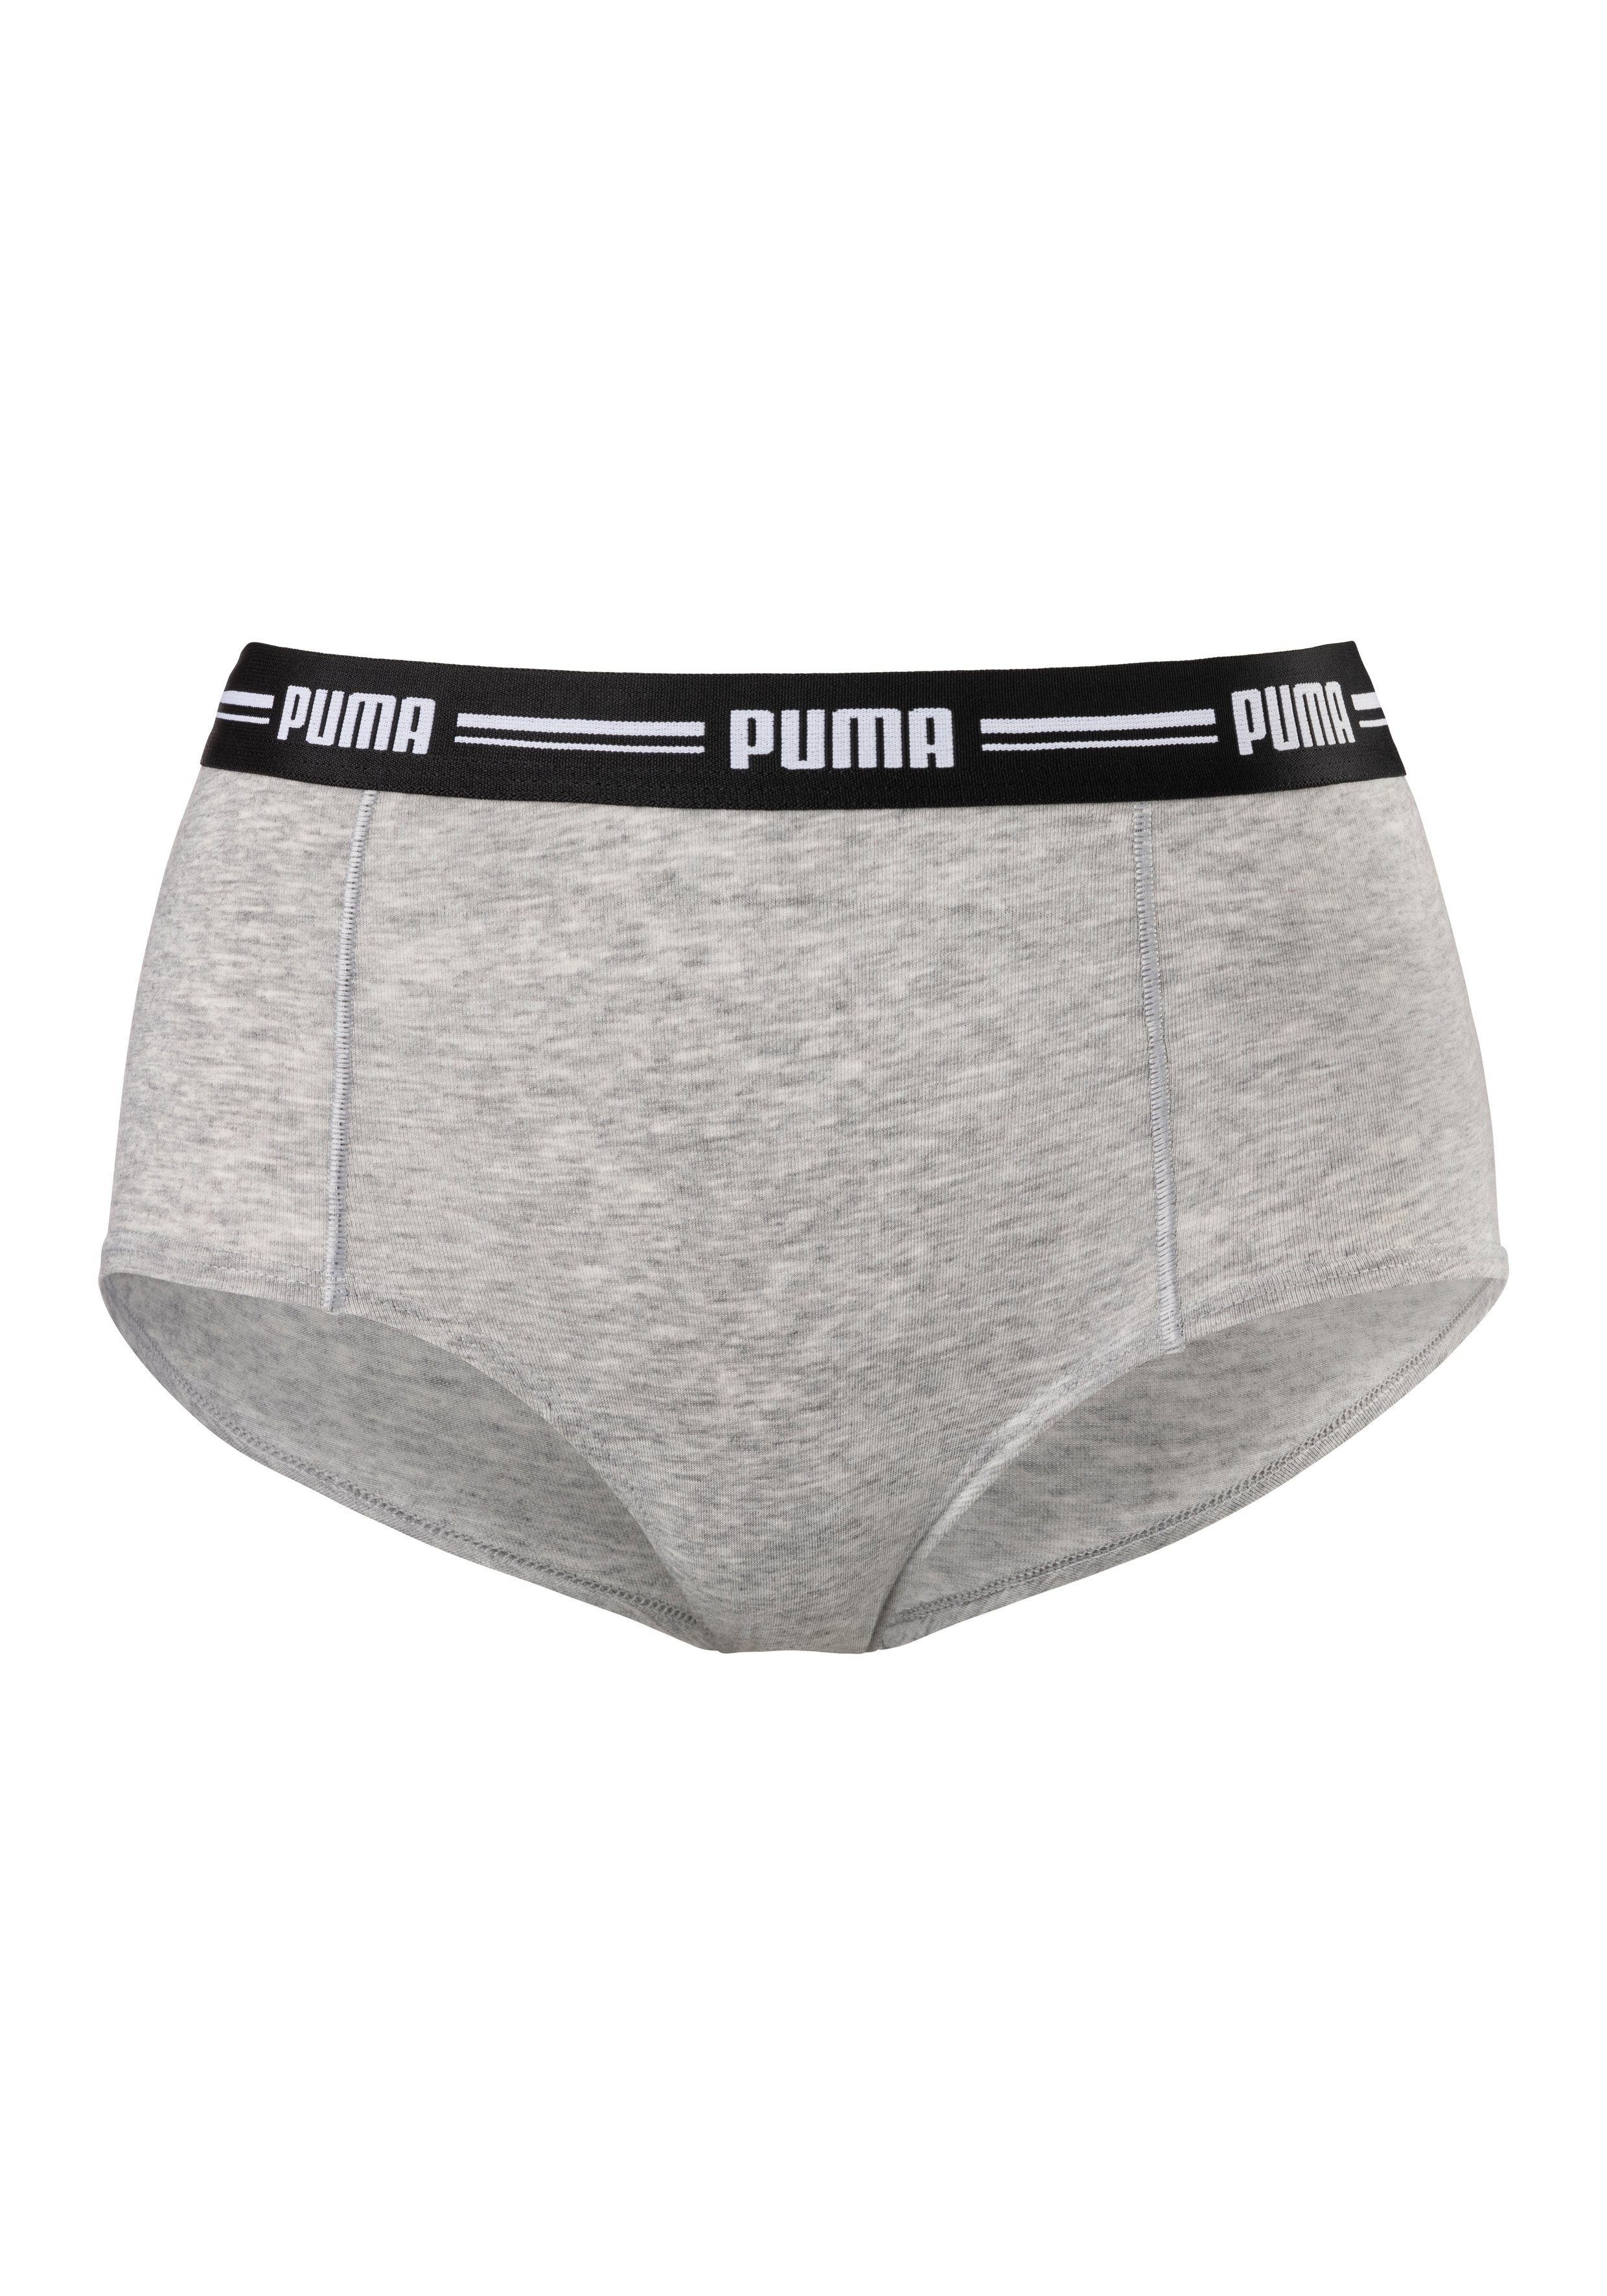 PUMA Panty grau-meliert 2-St) (Packung, Iconic